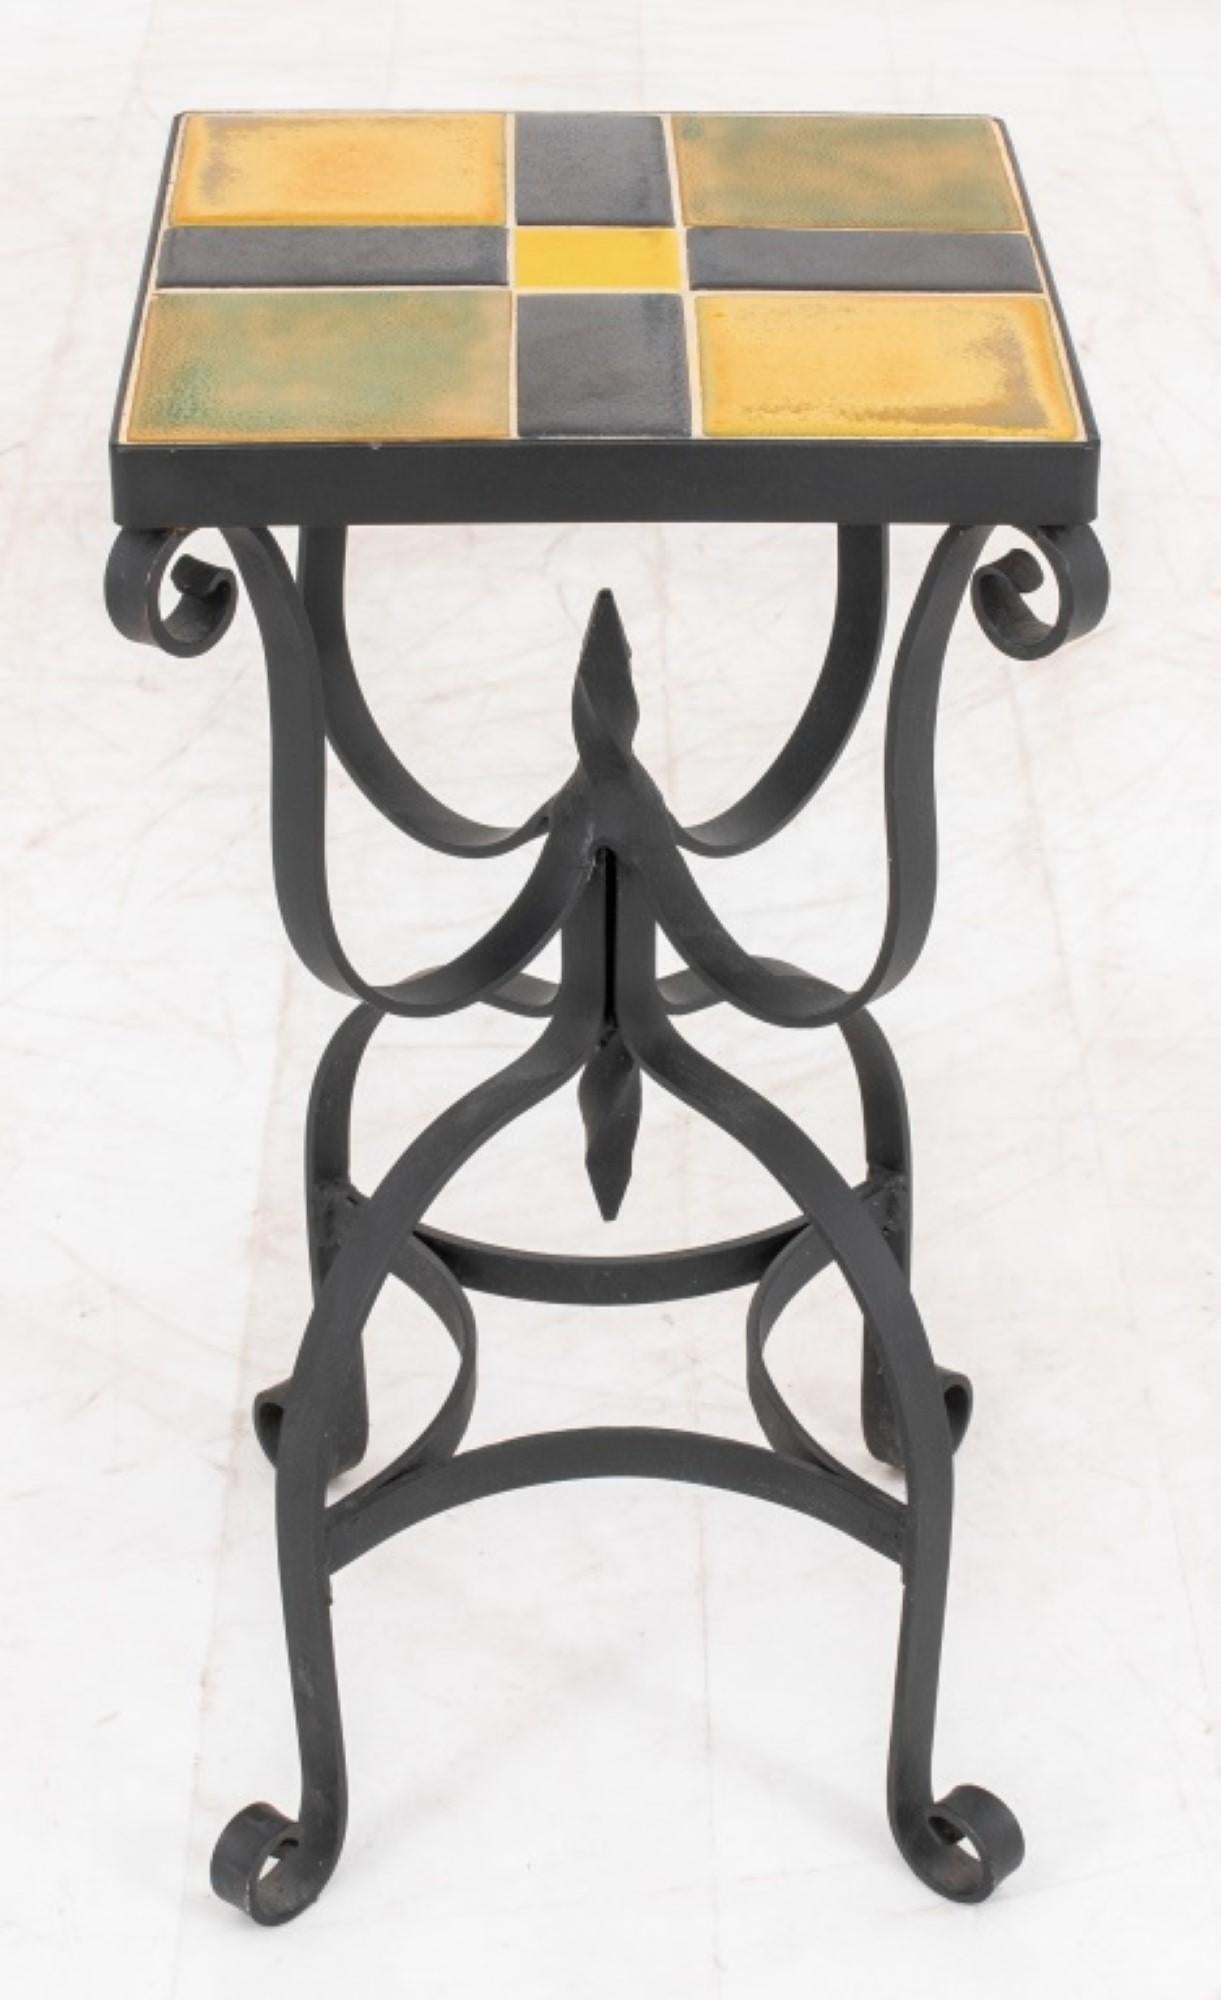 The set of two ceramic tile top iron accent tables includes a larger one,

Measuring approximately 22 inches in height, 11 inches in width, and 11 inches in depth. The tables feature a checkerboard pattern and scrolling design, making them suitable